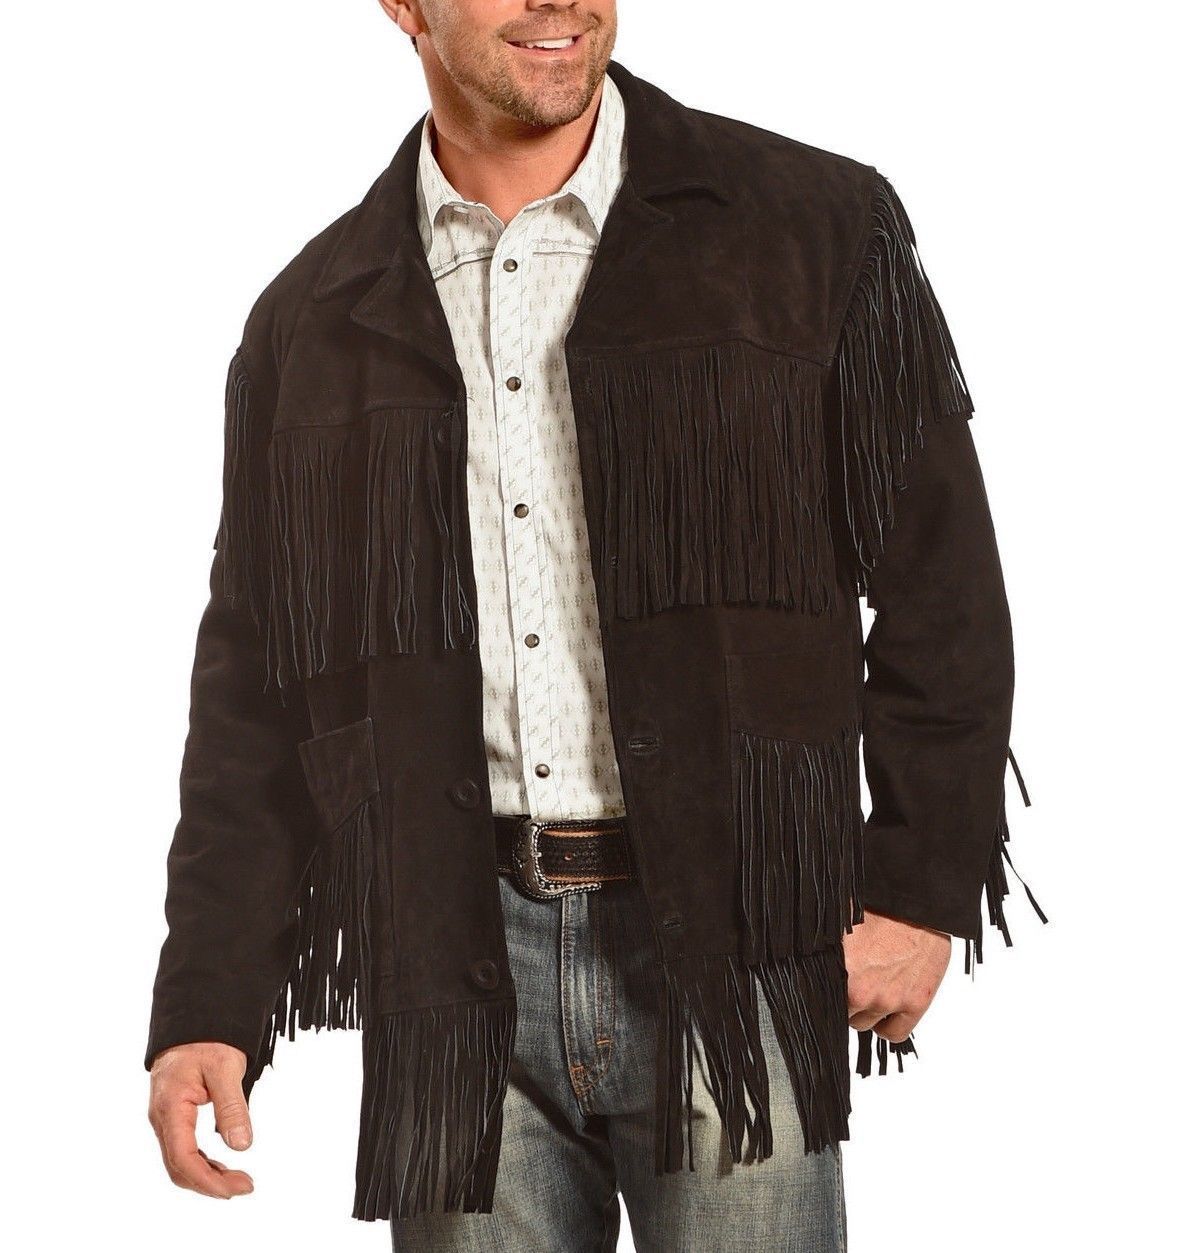 Men's black western style suede leather jacket suede leather cowboy ...